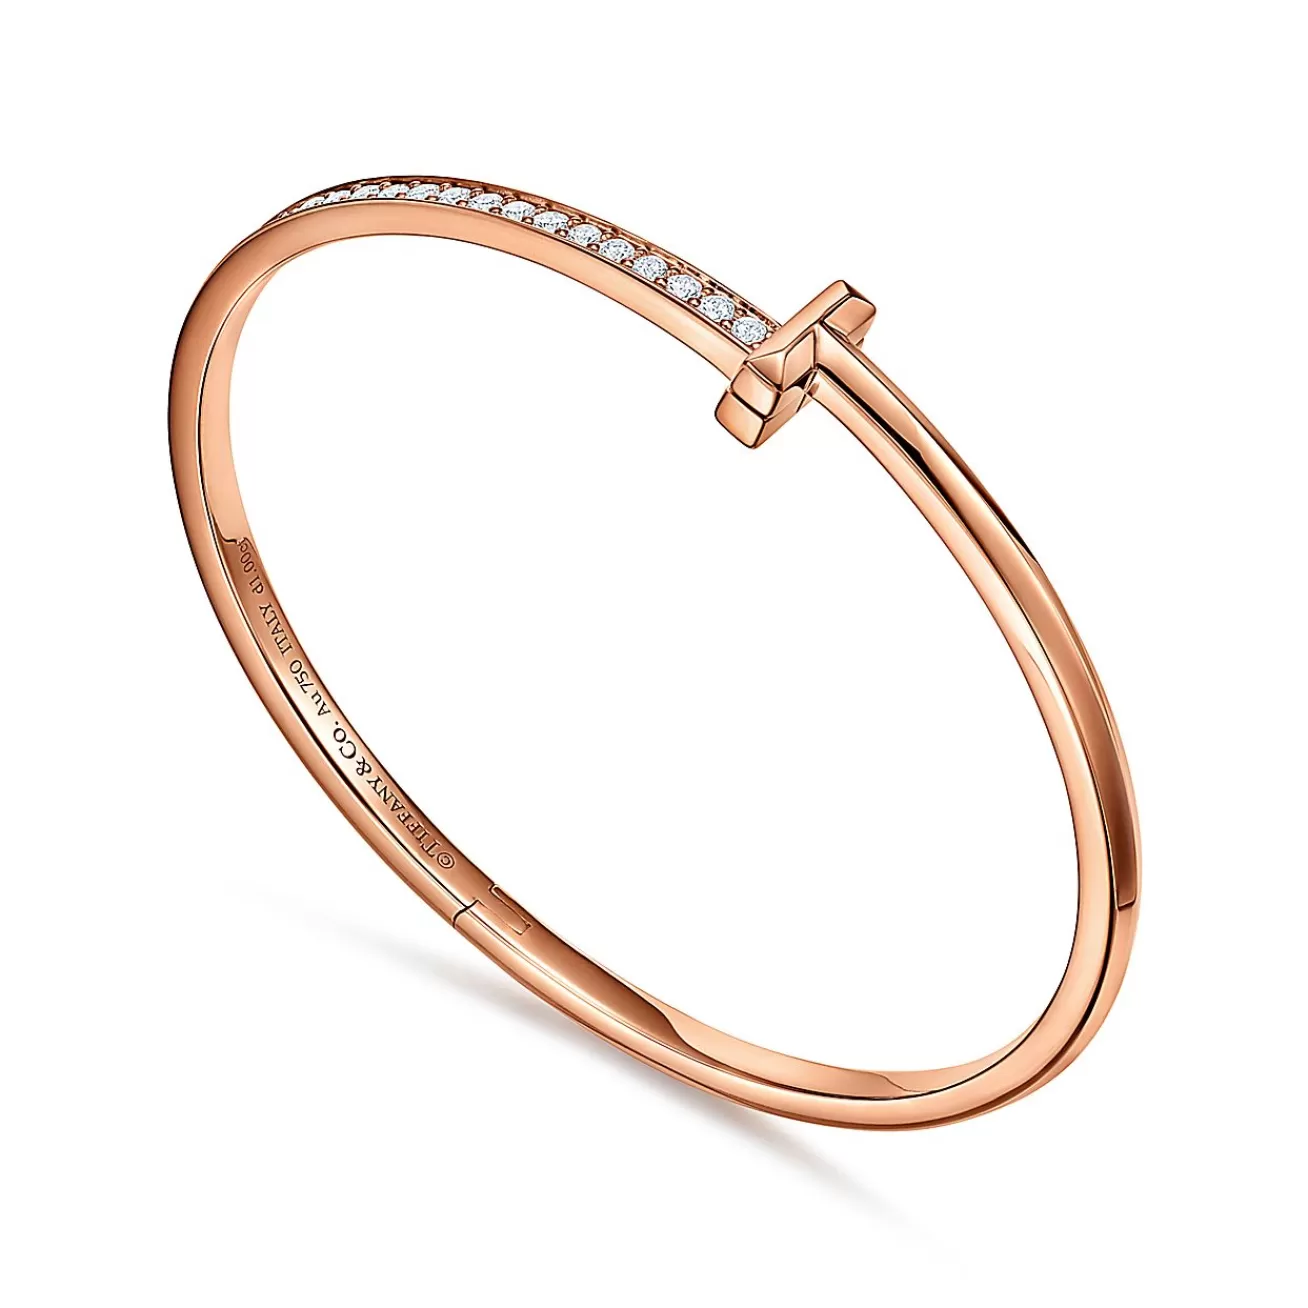 Tiffany & Co. Tiffany T T1 Hinged Bangle in Rose Gold with Diamonds, Narrow | ^ Bracelets | Gifts for Her